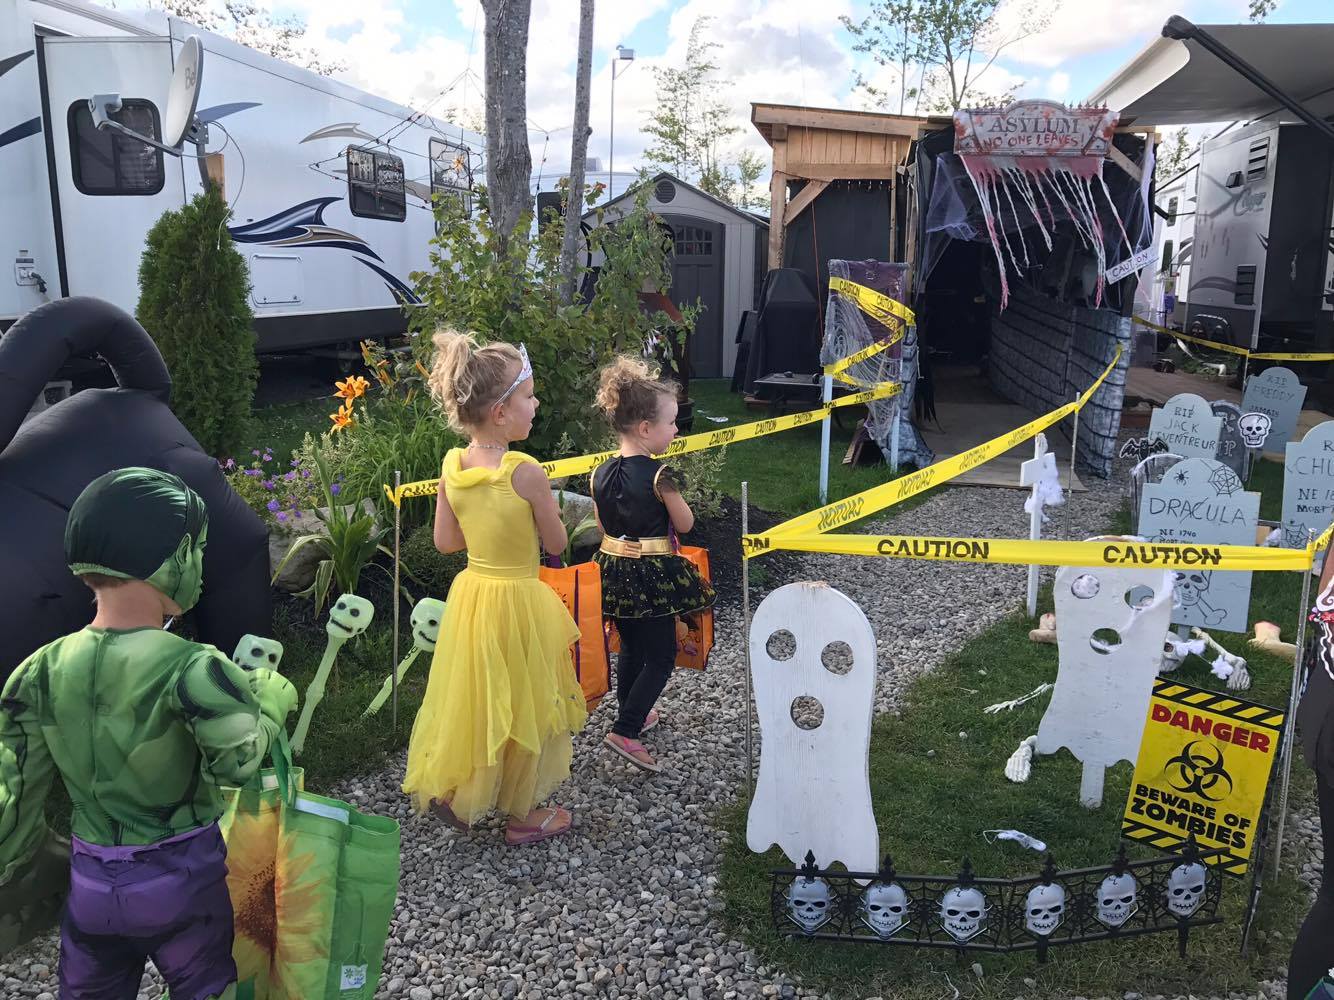 http://www.familycampgrounds.ca/wp-content/uploads/2017/08/halloween-2017-complexe-atlantide-3.jpg